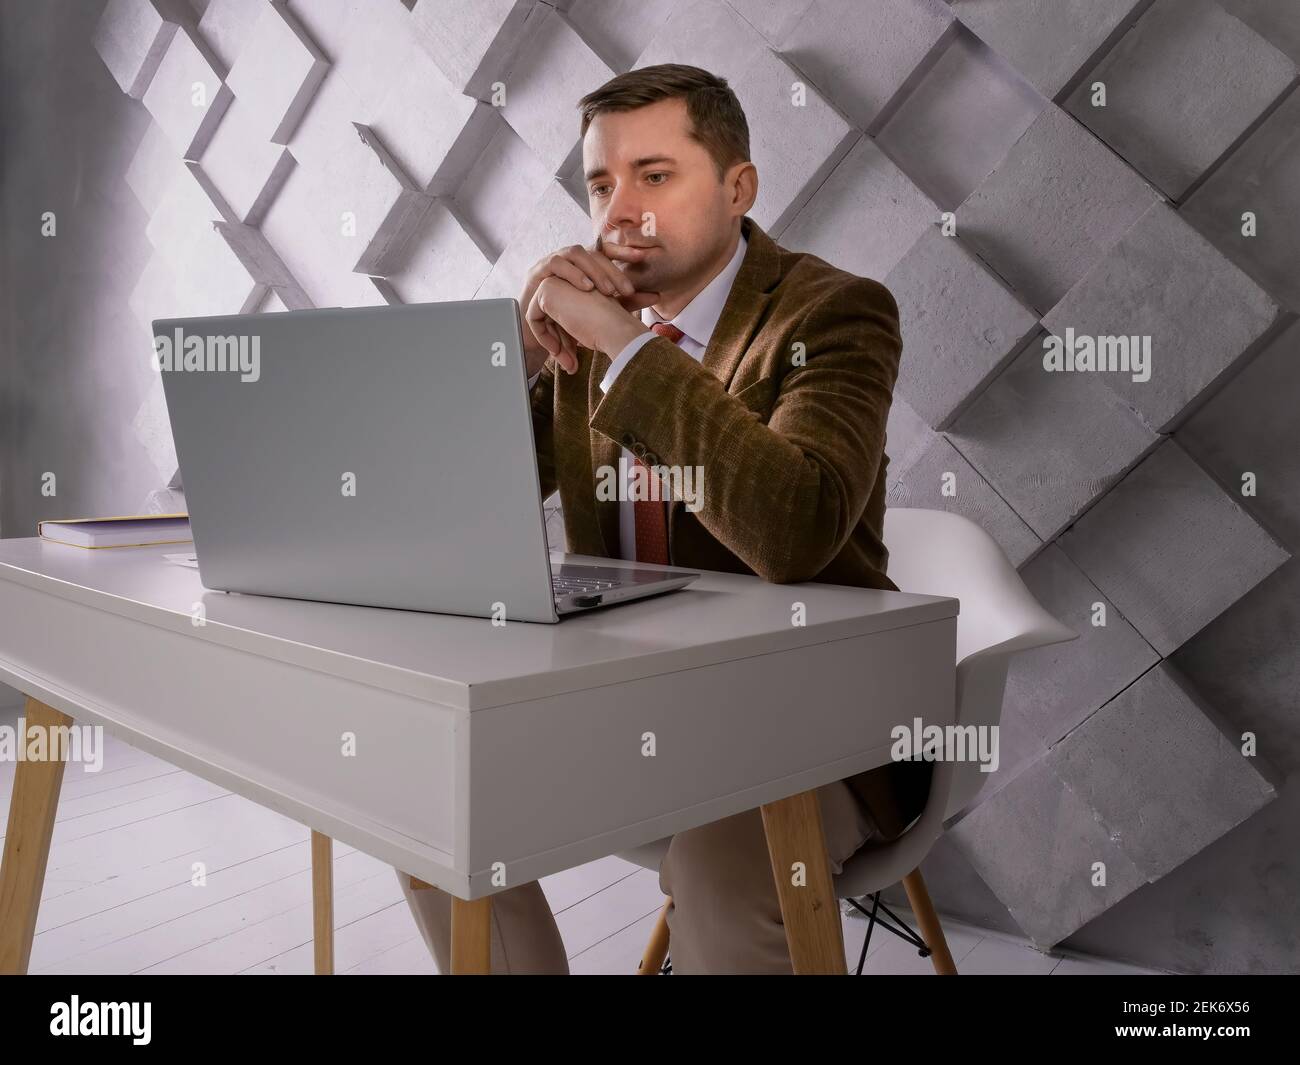 The man at the table looks at the laptop screen. Stock Photo